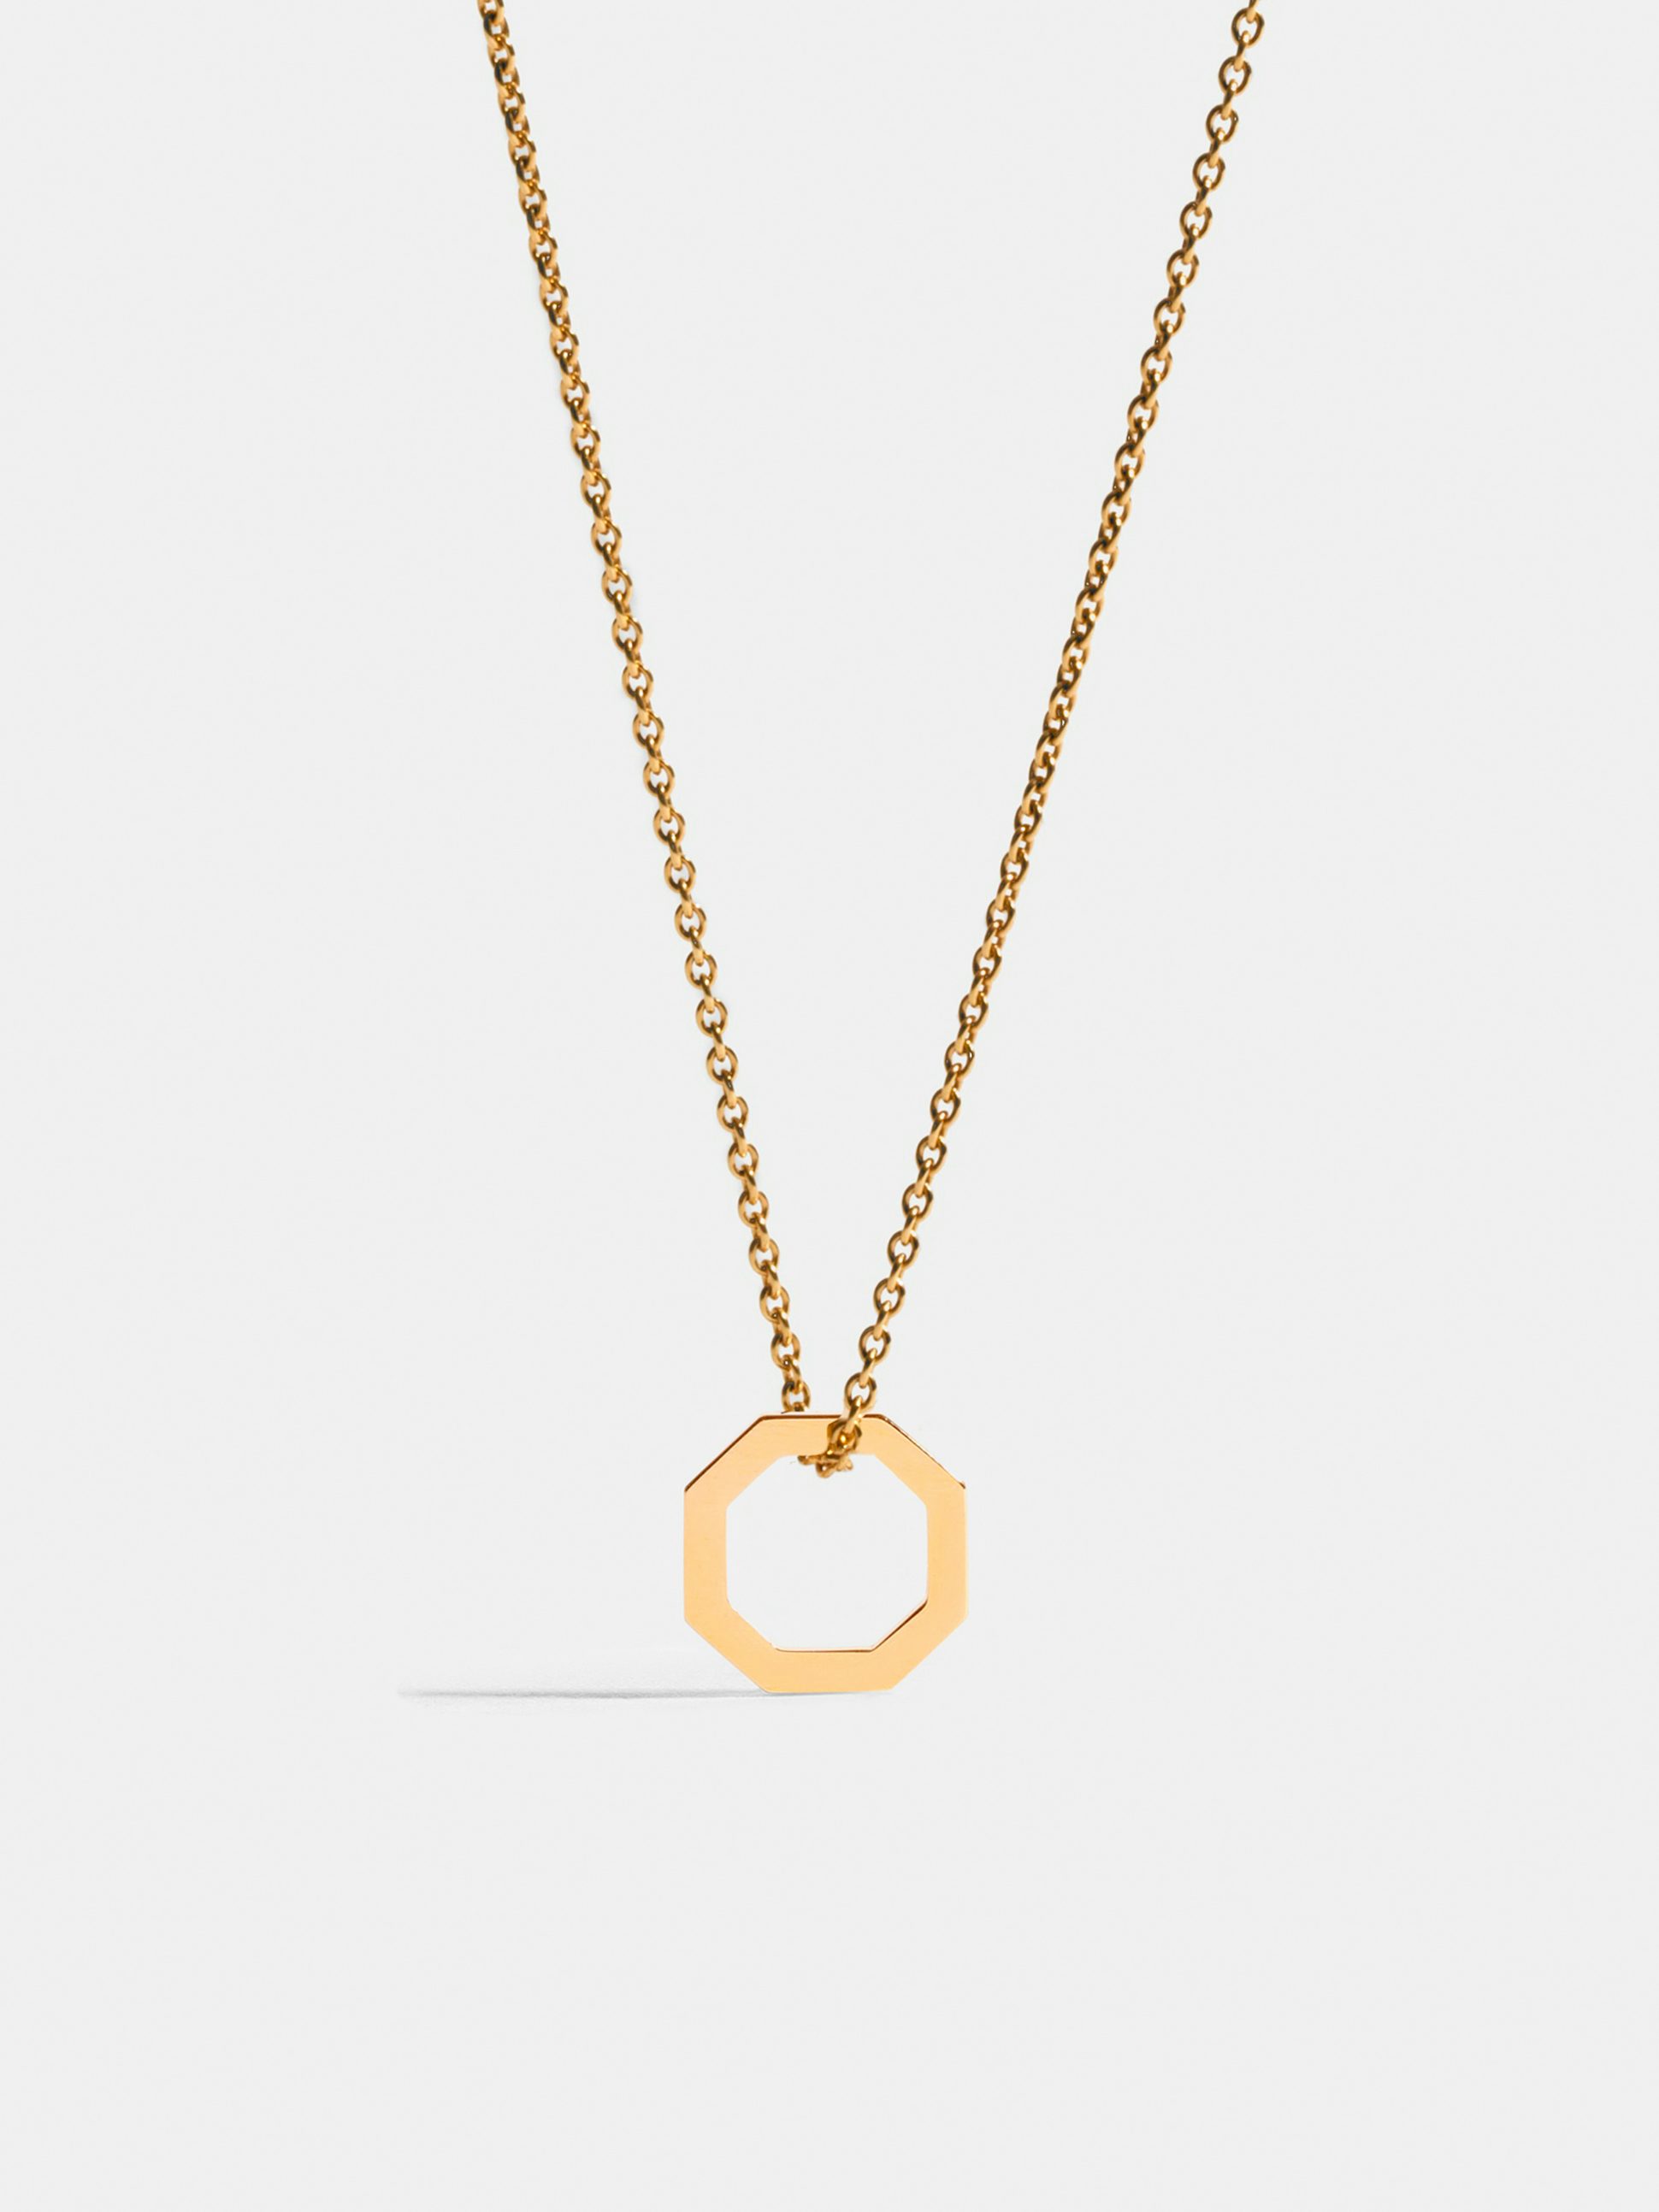 Octogone 10mm pendant in 18k Fairmined ethical yellow gold, on a chain.